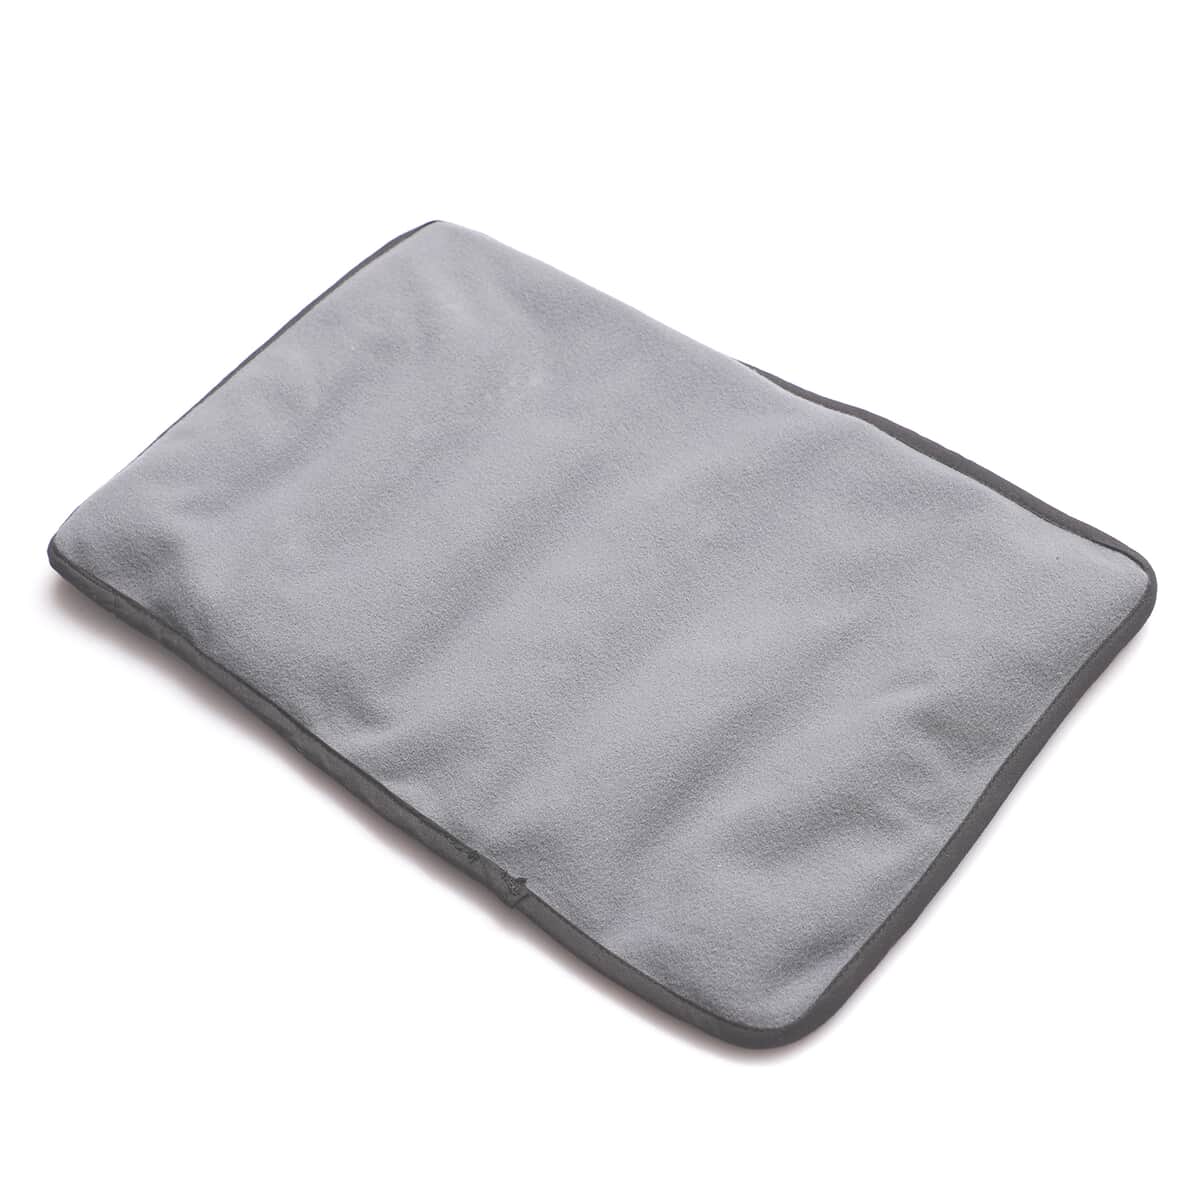 Gray Polyester Travelling Shungite Pillow (8"x11") image number 0